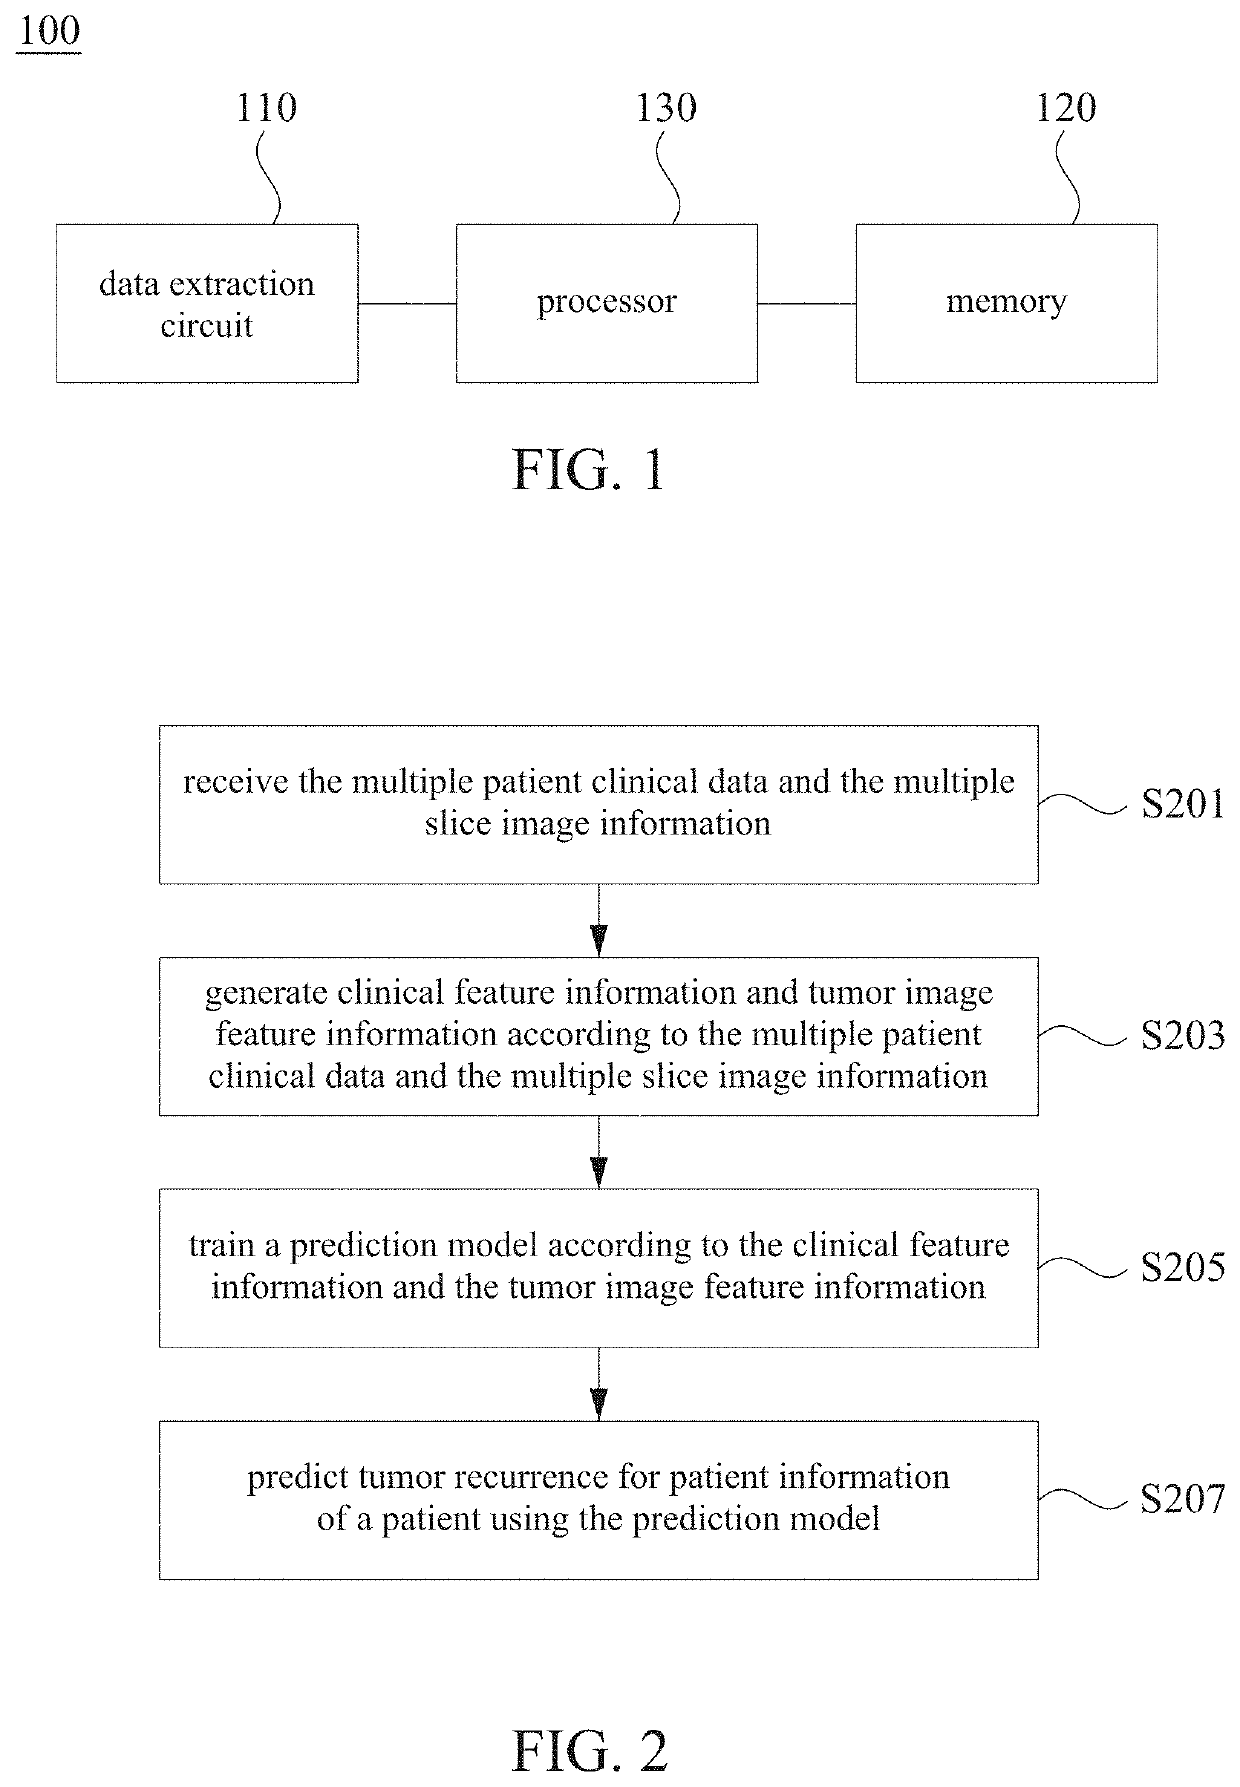 Tumor recurrence prediction device and method